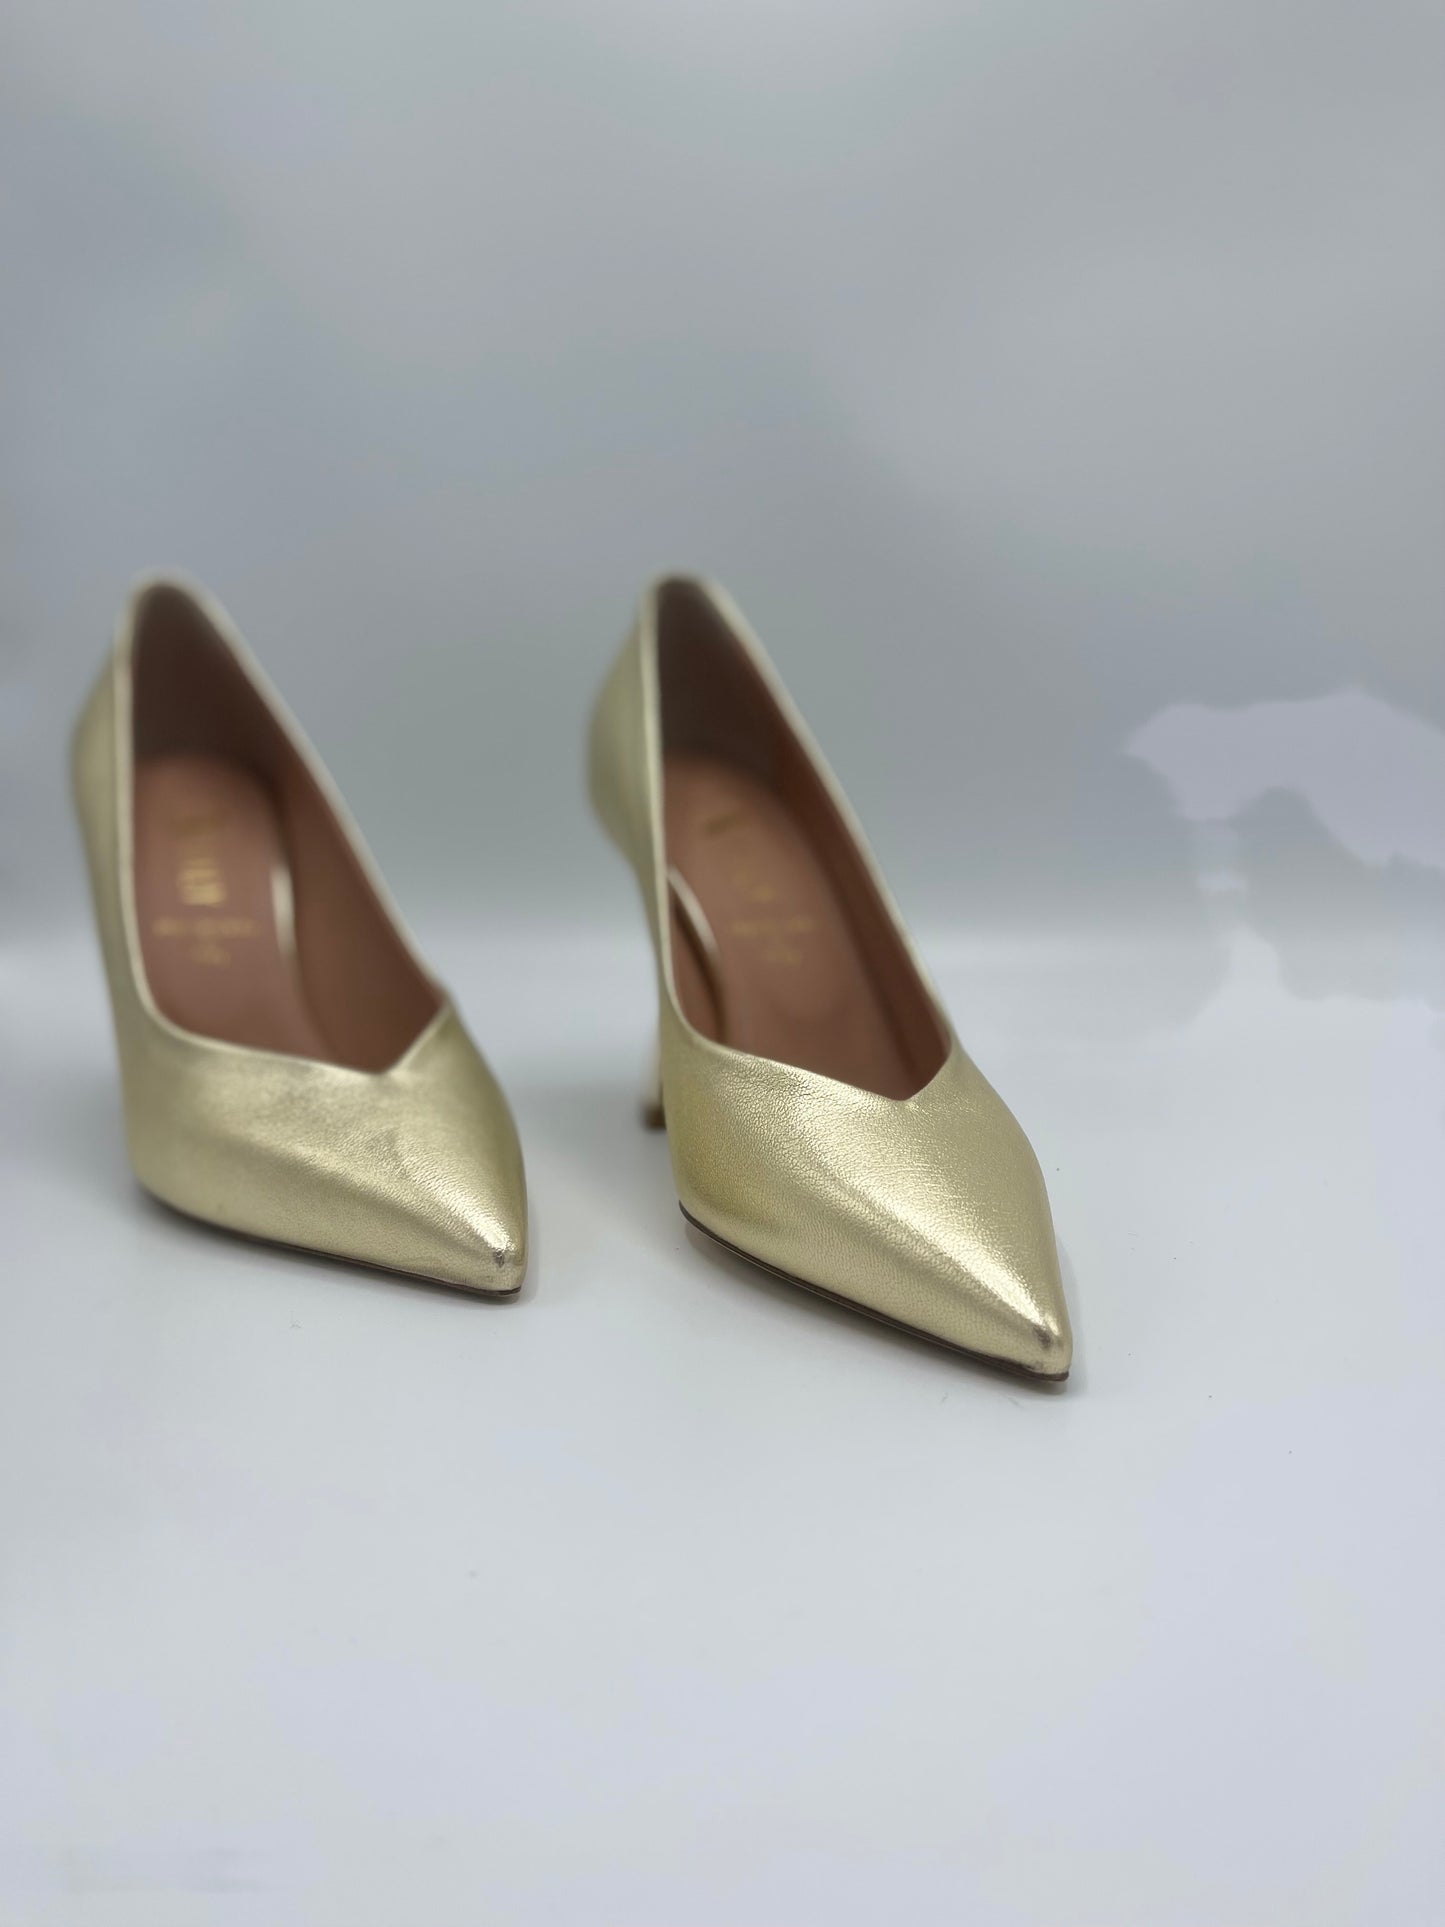 BALE GOLD HEEL - FRATELLI RUSSO